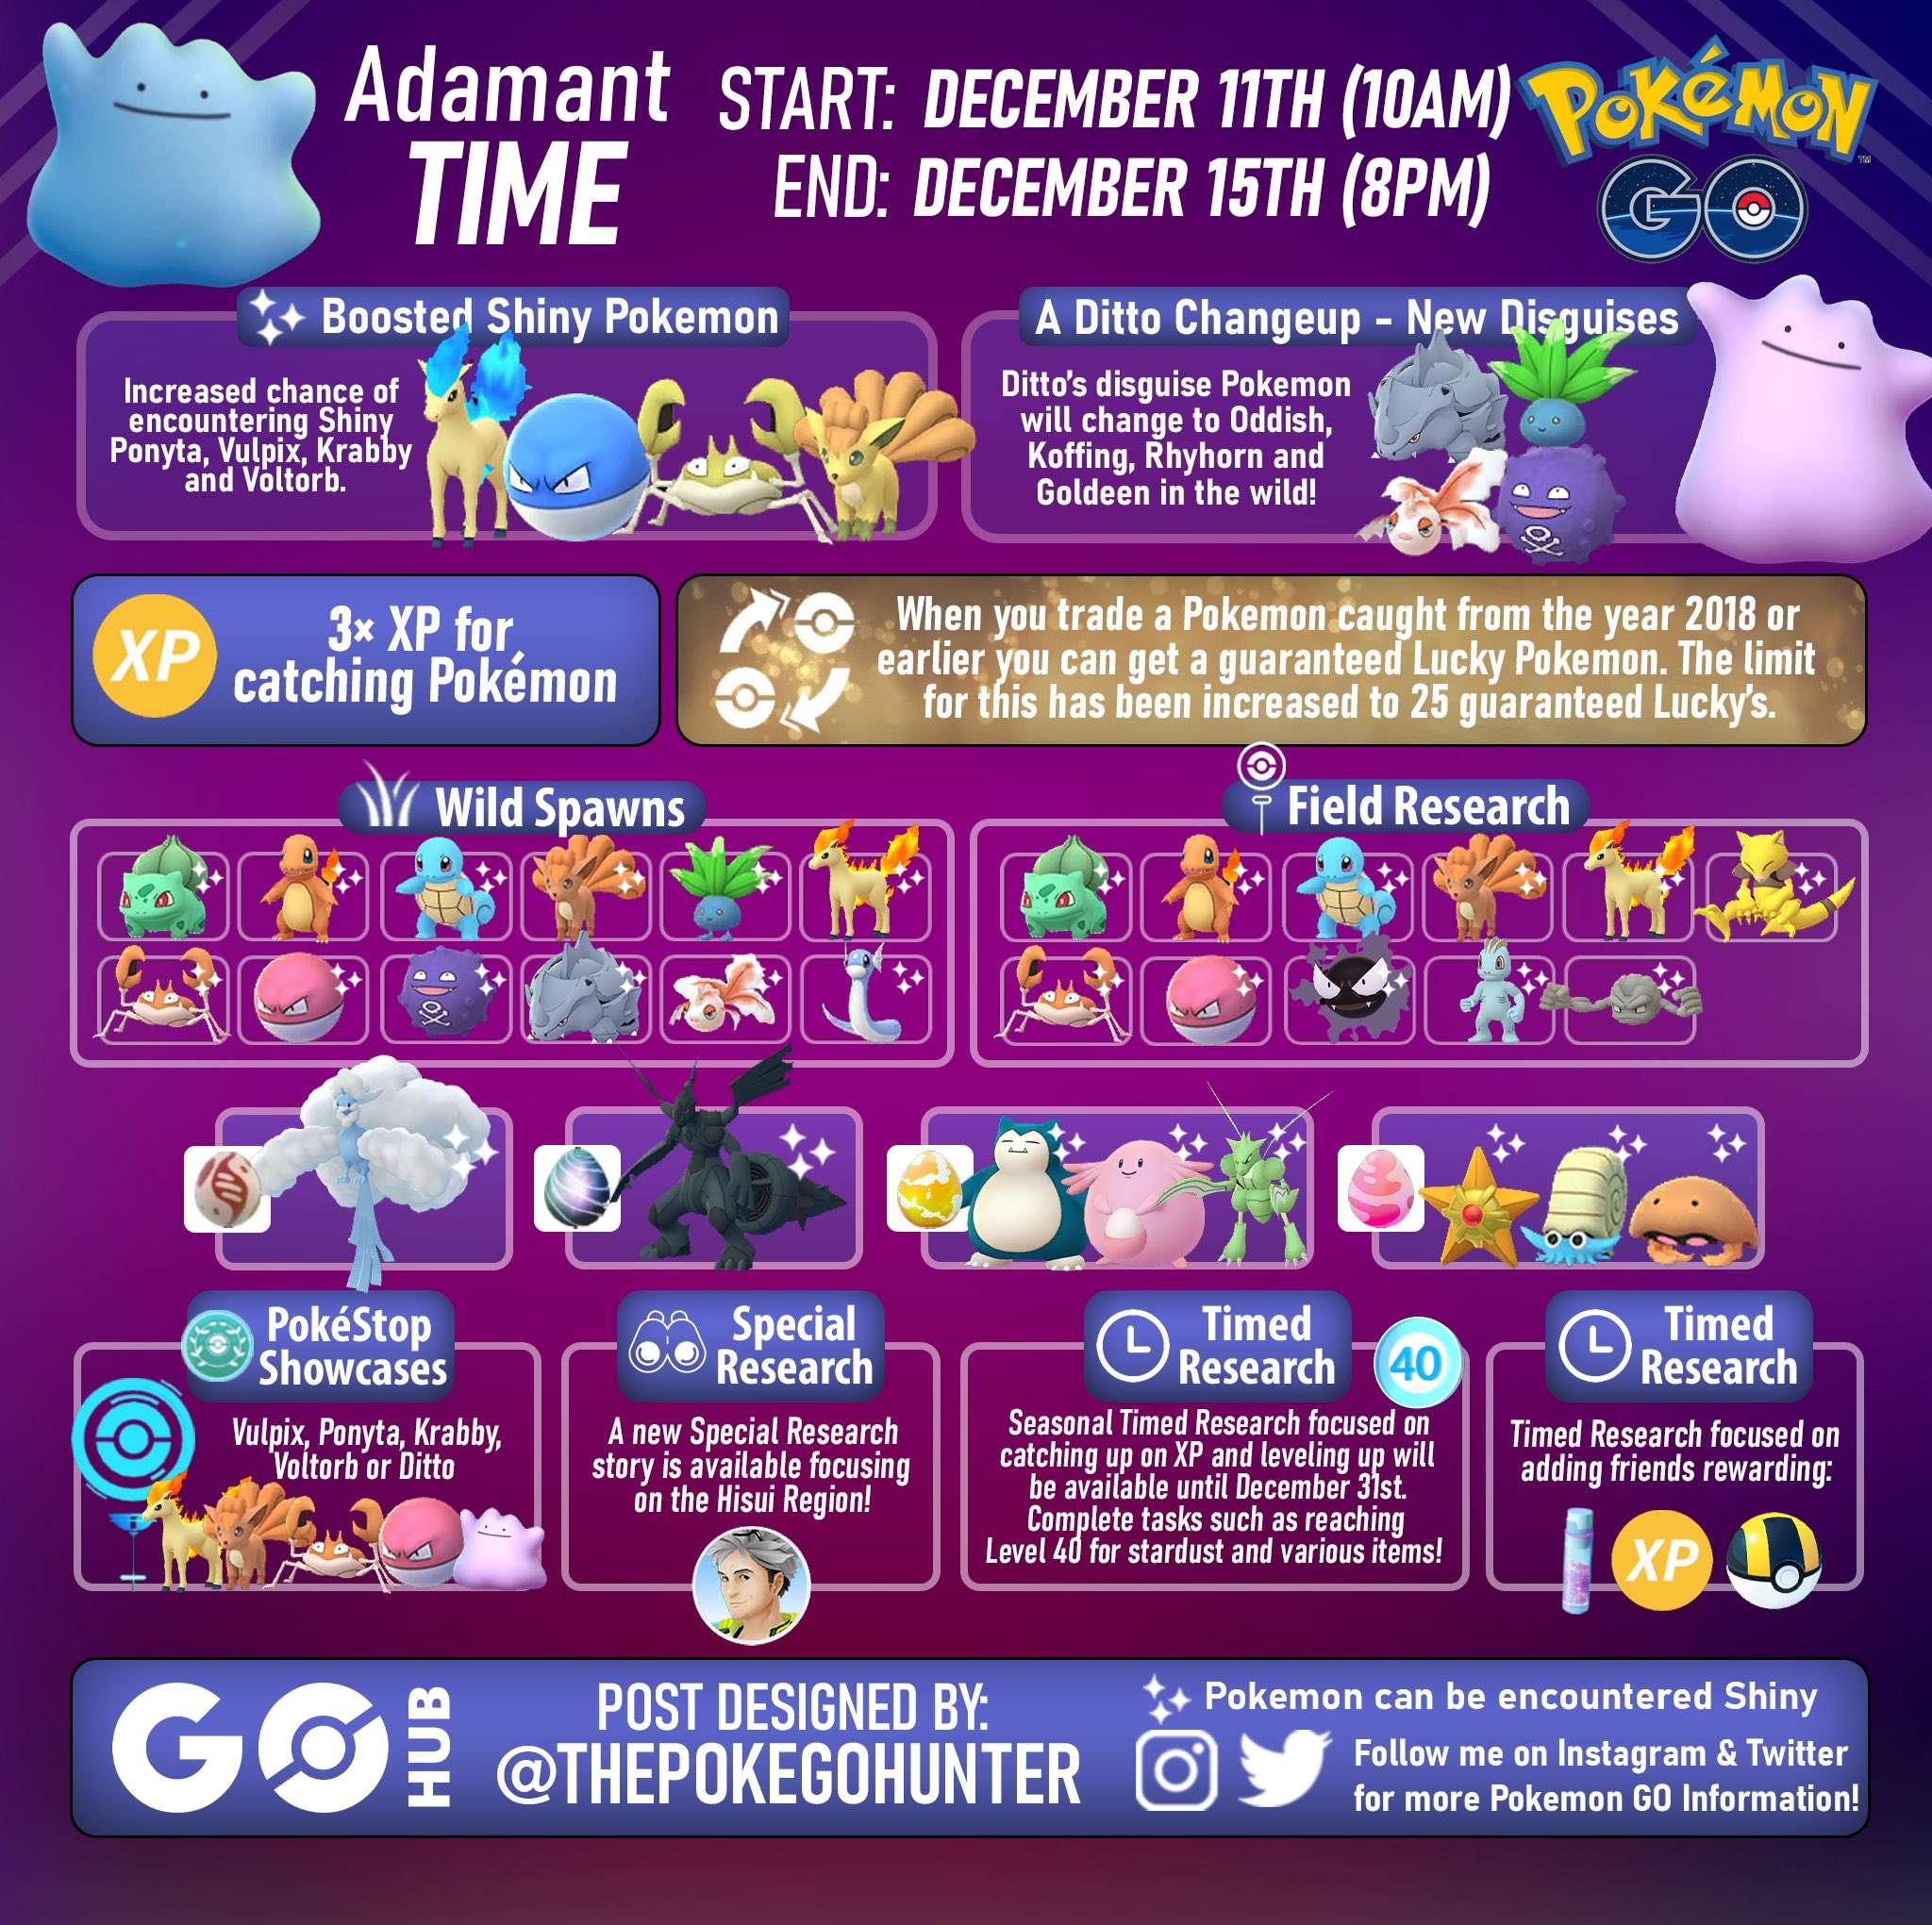 All Ditto Disguises In Pokémon GO (December 2023)